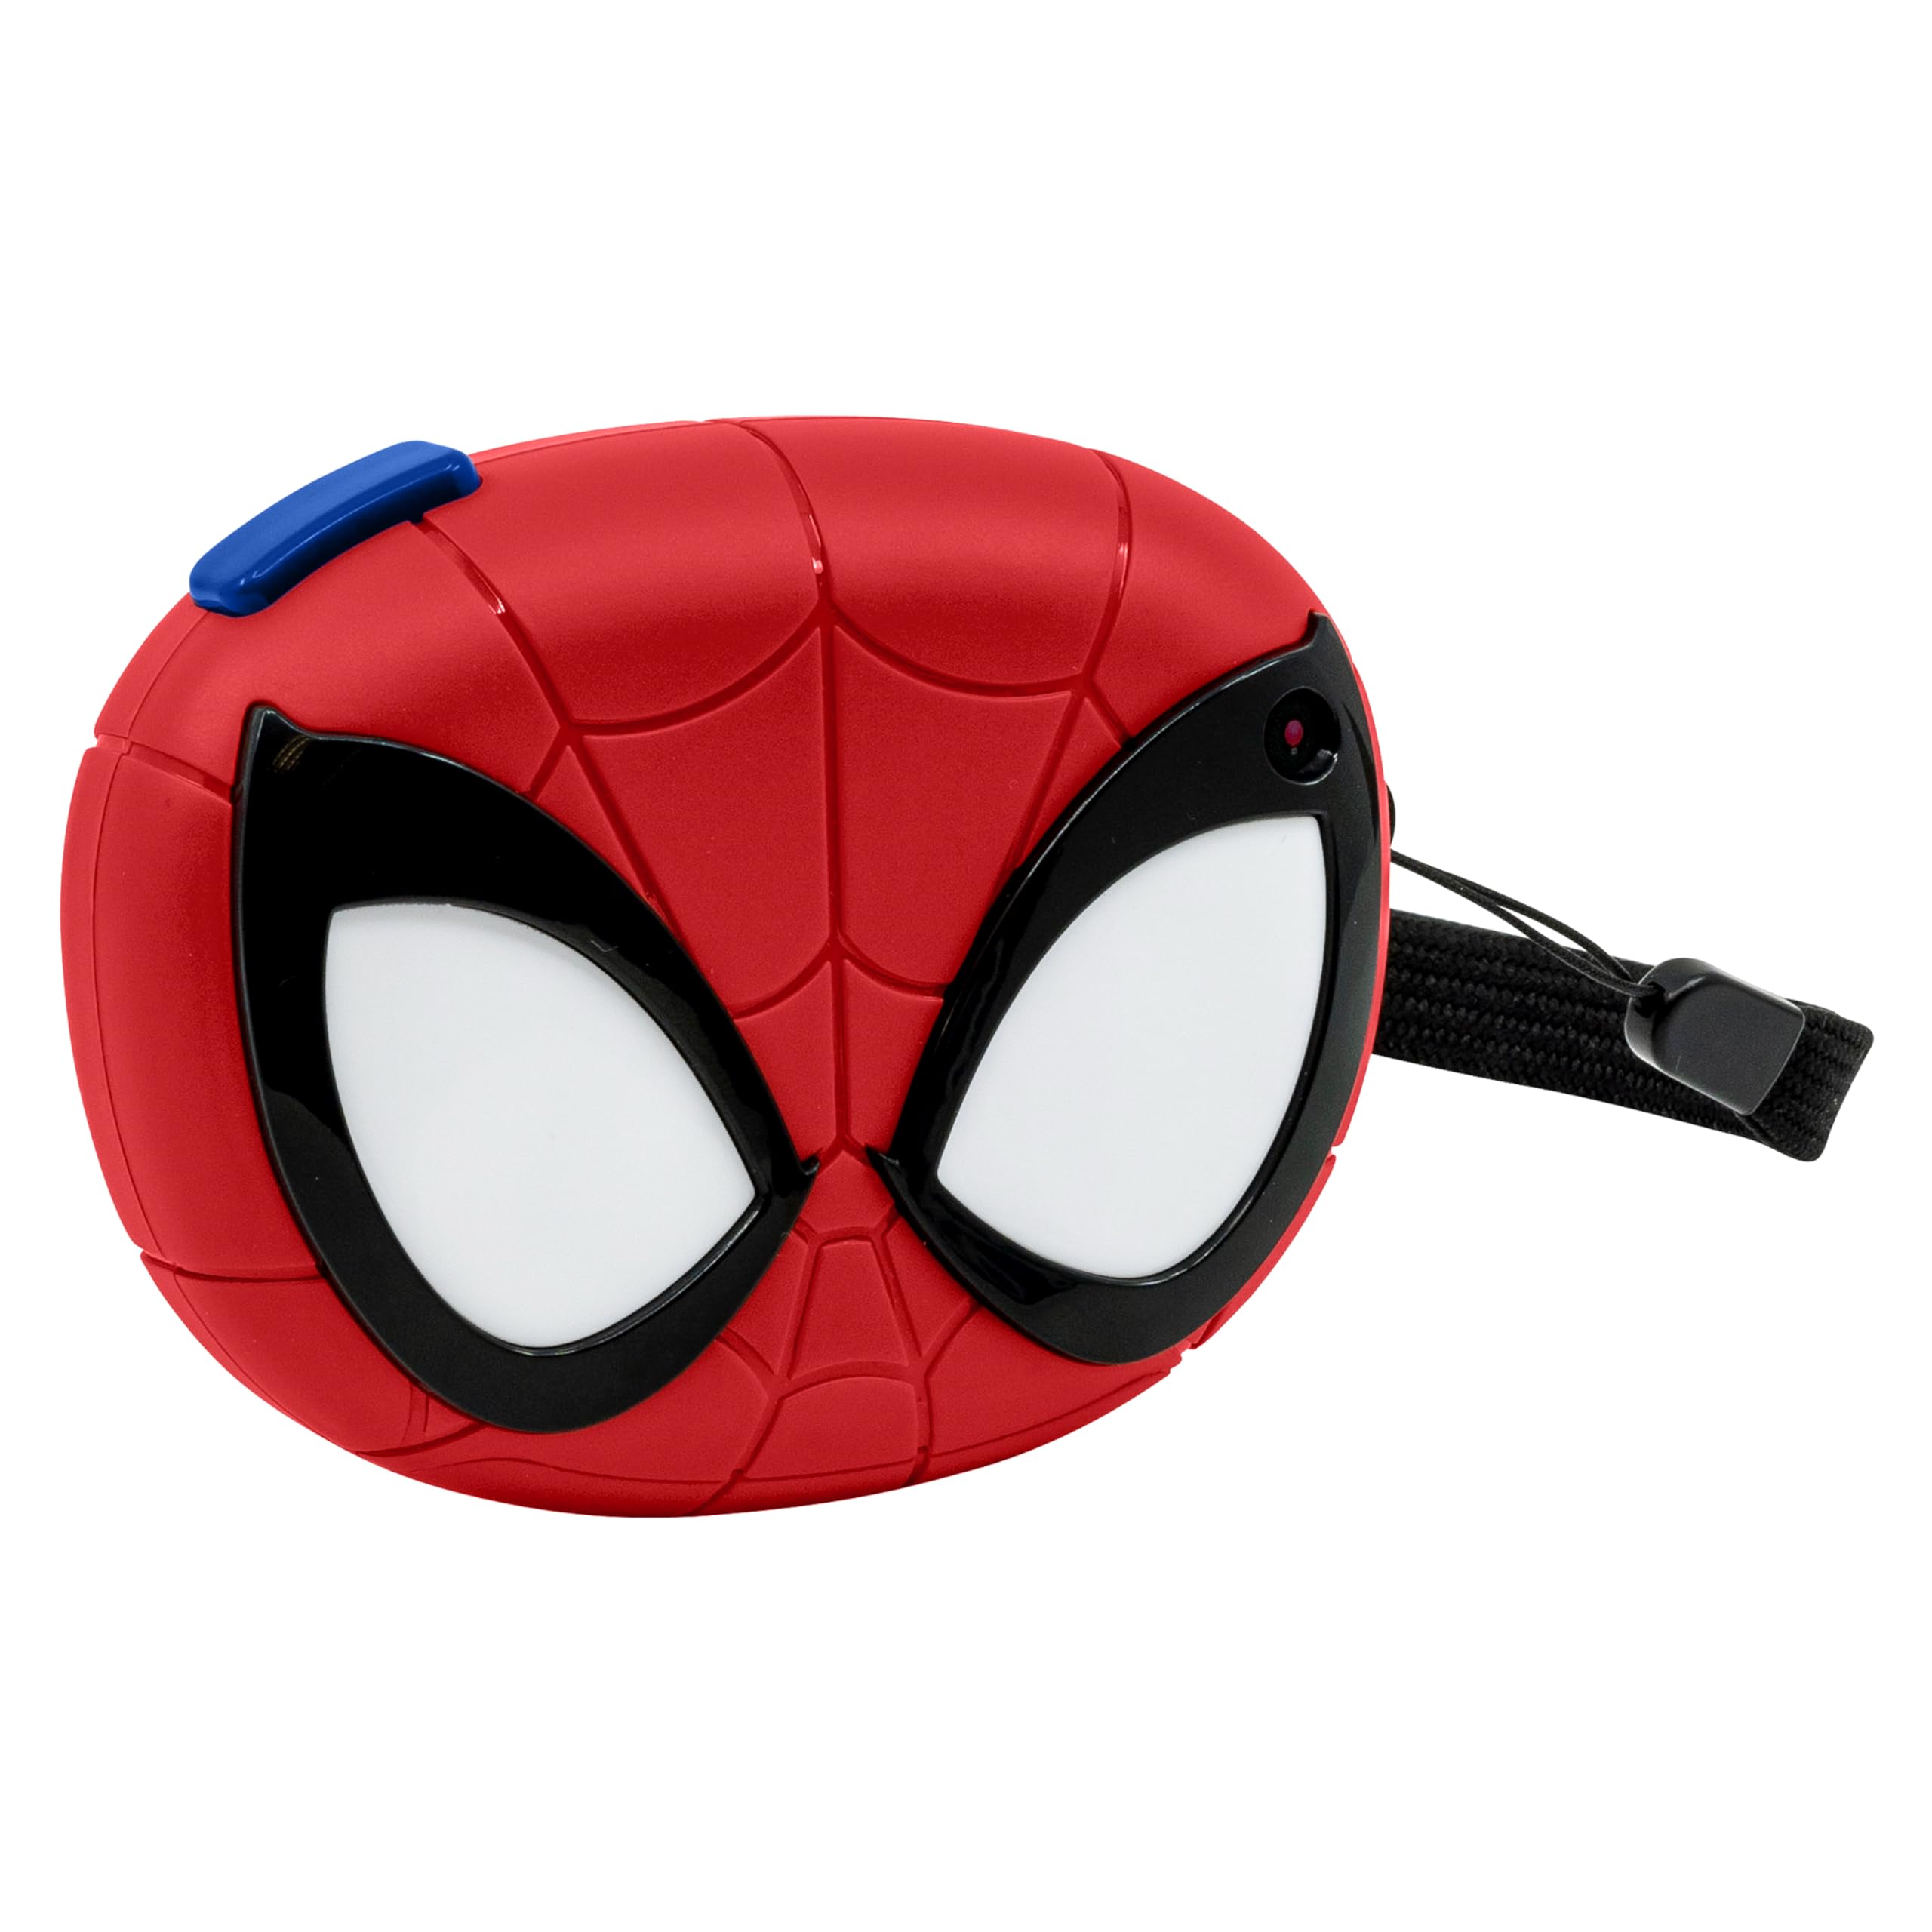 ekids Spiderman Kids Camera with SD Card, Digital Camera for Kids with Video Camera, Built-in Digital Stickers for Fans of Spiderman Gifts for Kids